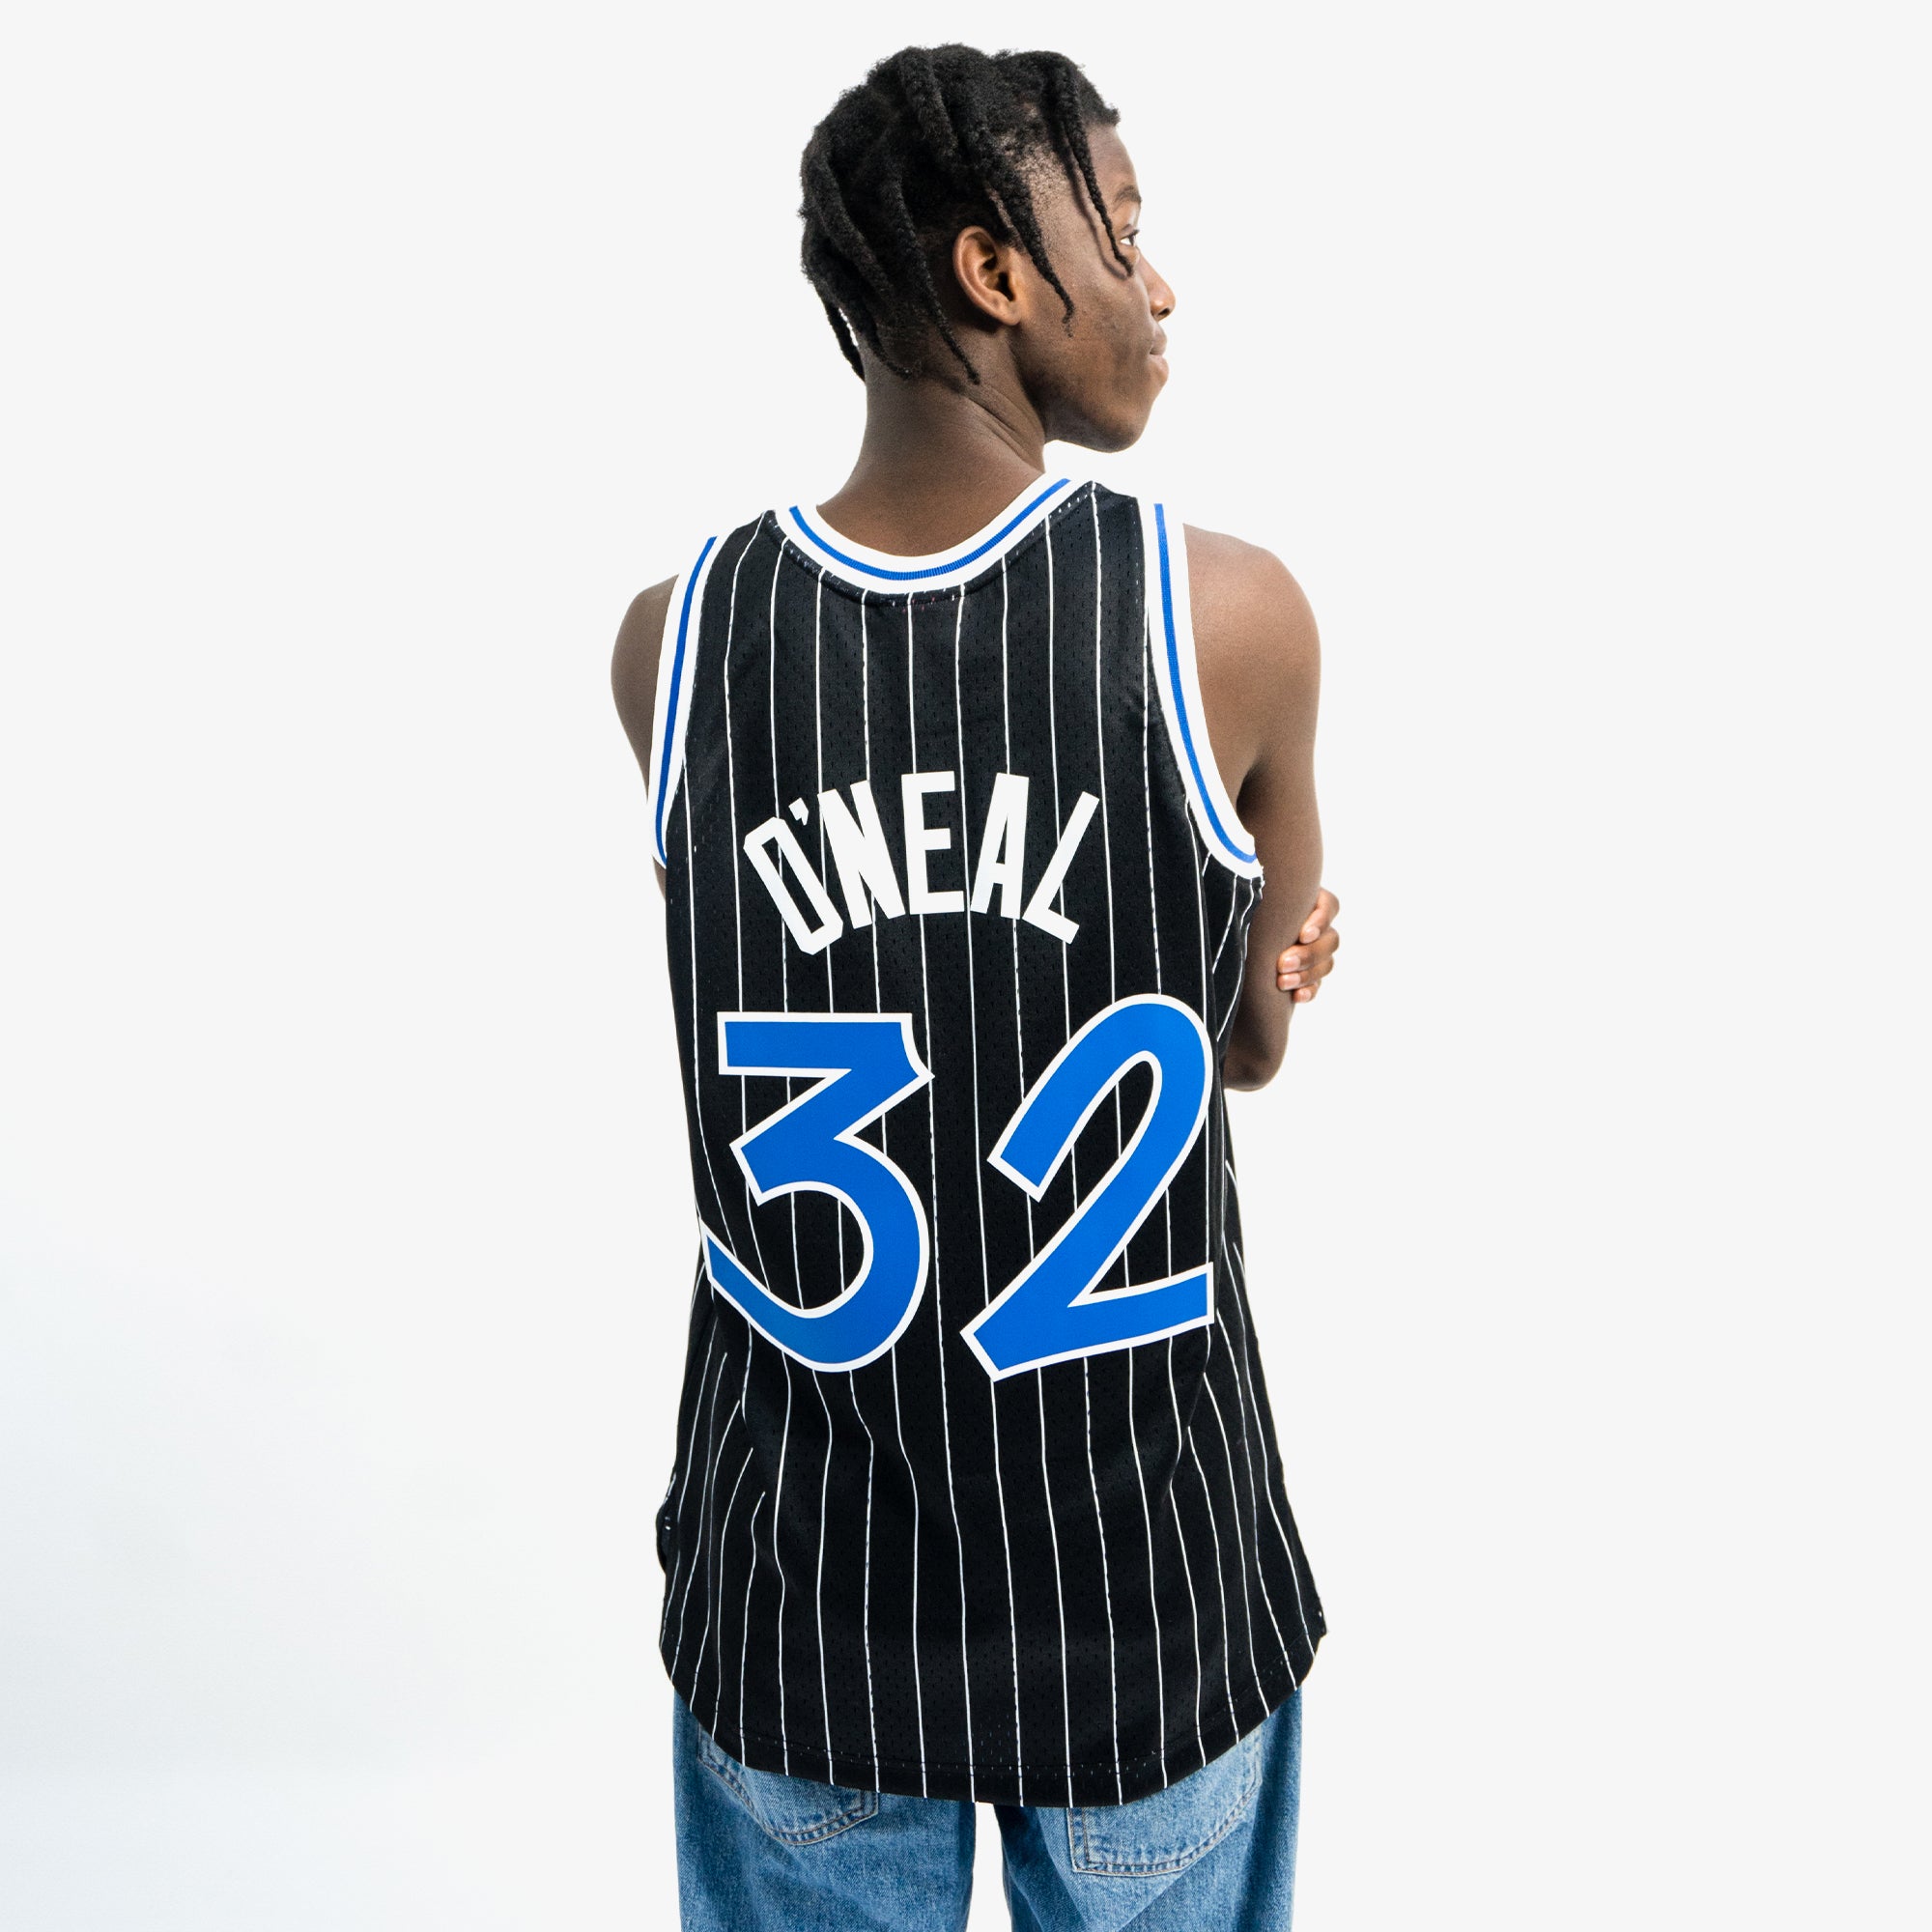 Men's Shaquille O'Neal Blue Retro Classic Team Jersey - Kitsociety